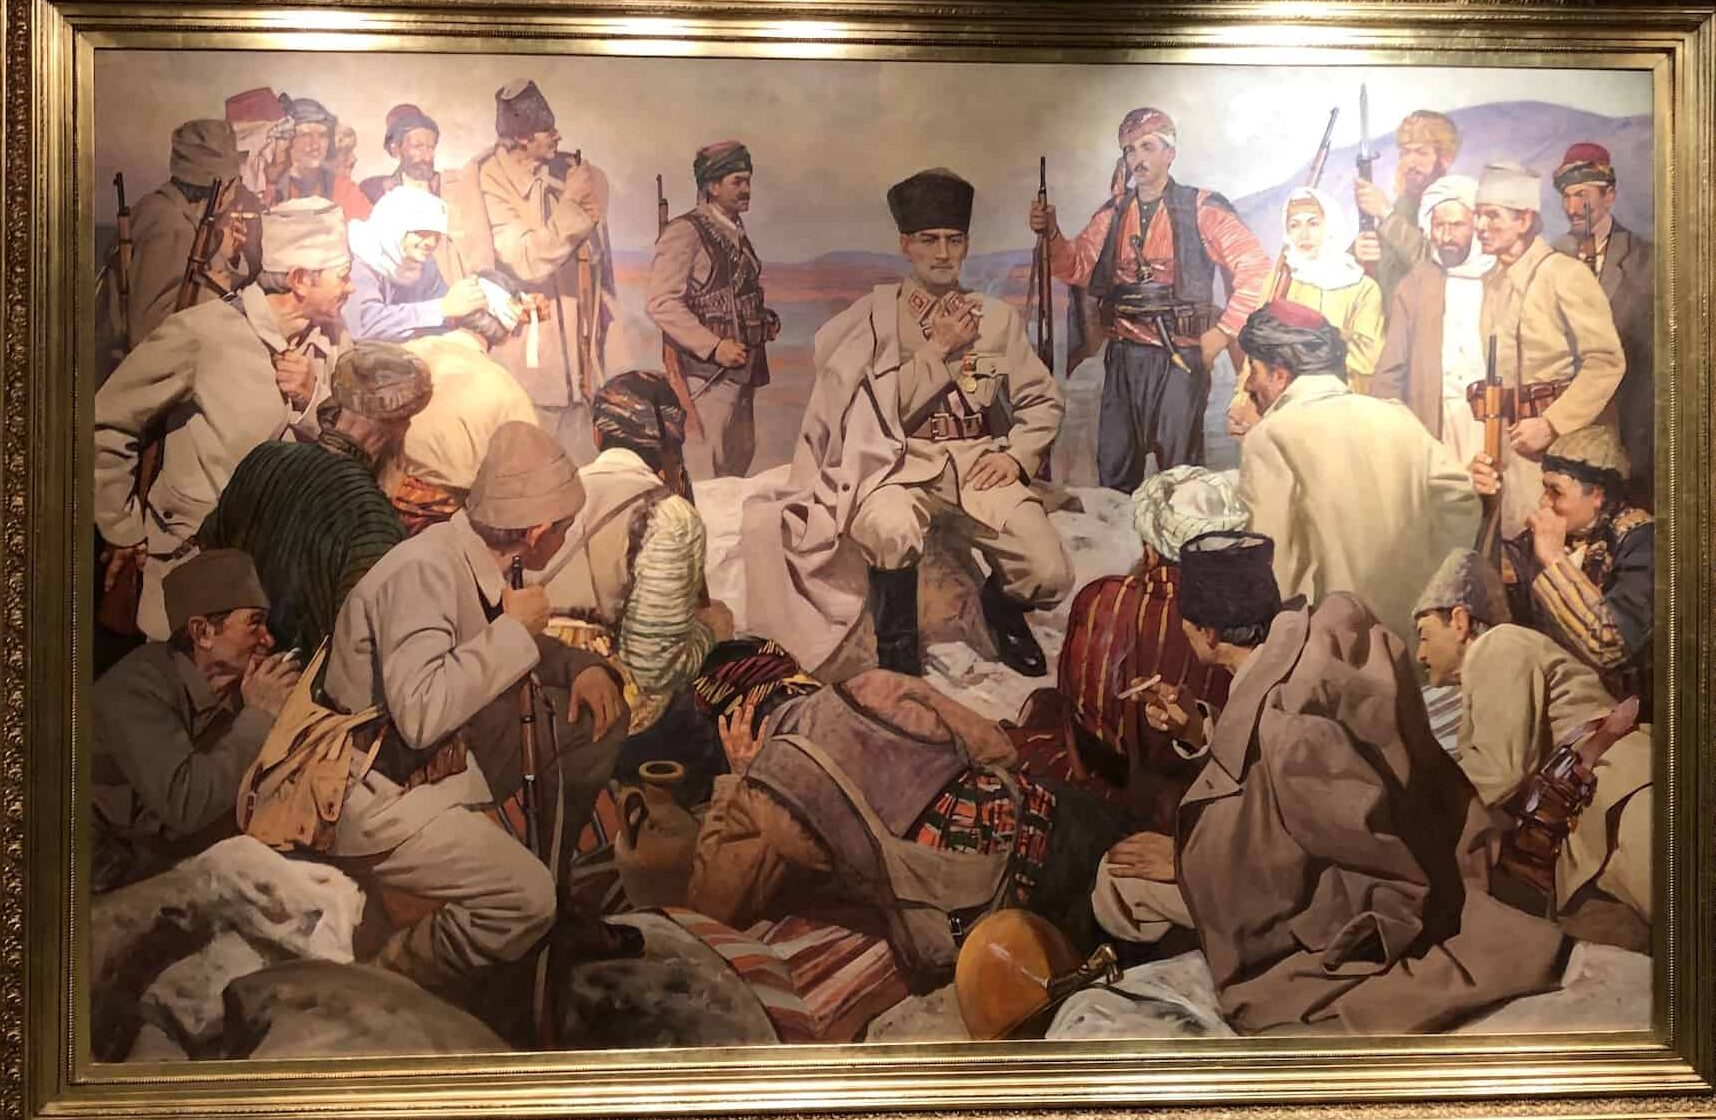 Painting of Atatürk resting with his soldiers